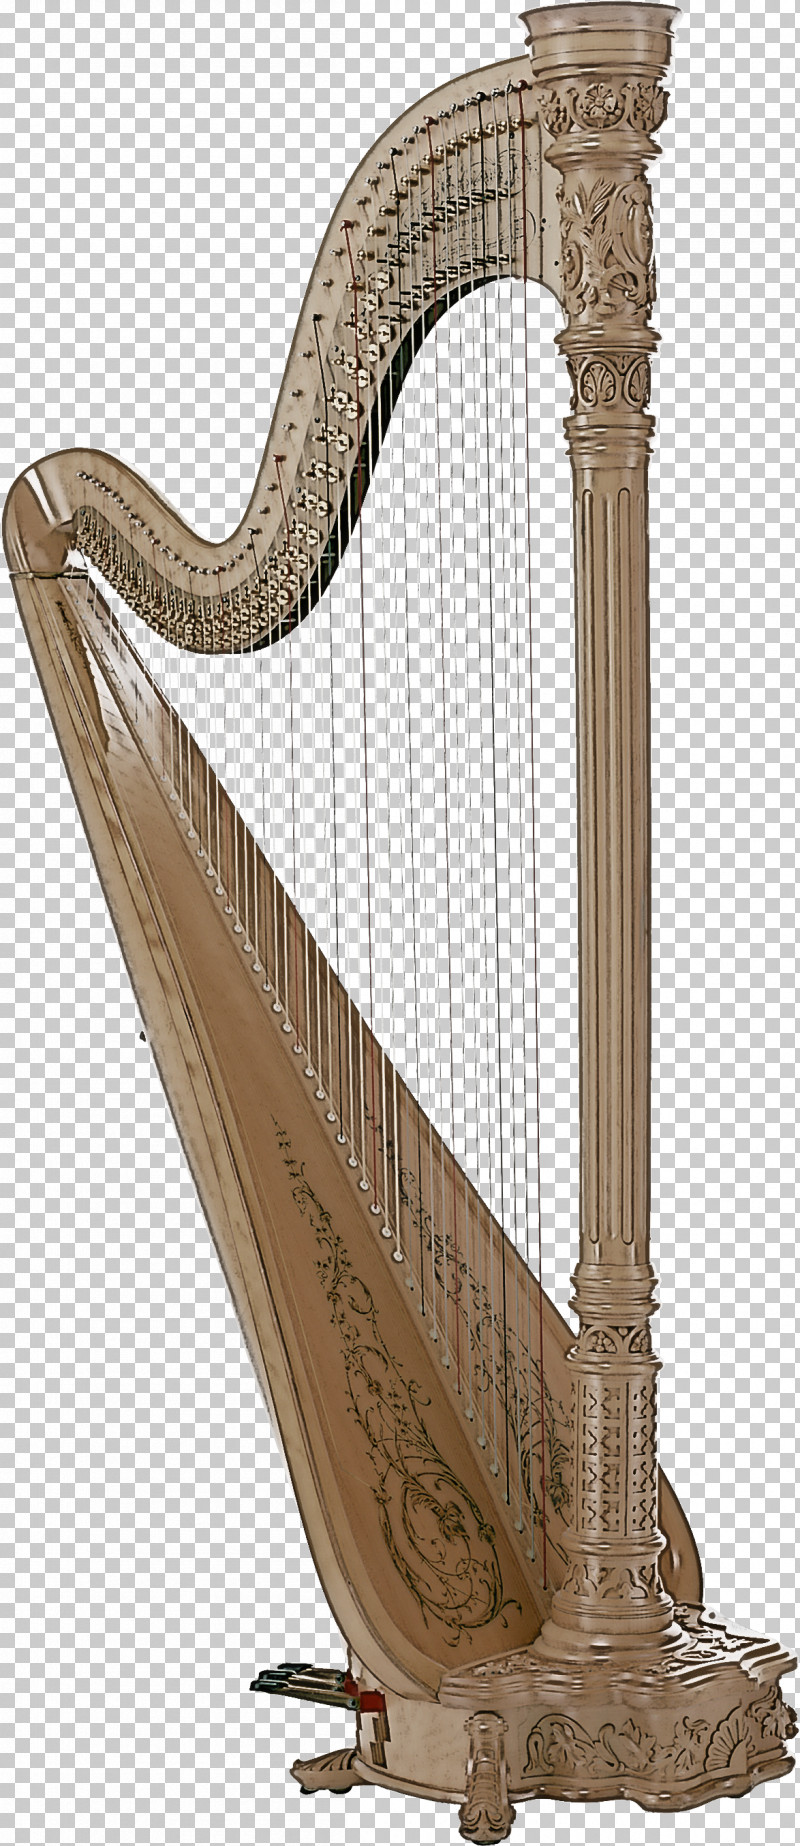 Harp Clàrsach Konghou Plucked String Instruments String Instrument PNG, Clipart, Harp, Harpist, Konghou, Musical Instrument, Plucked String Instruments Free PNG Download